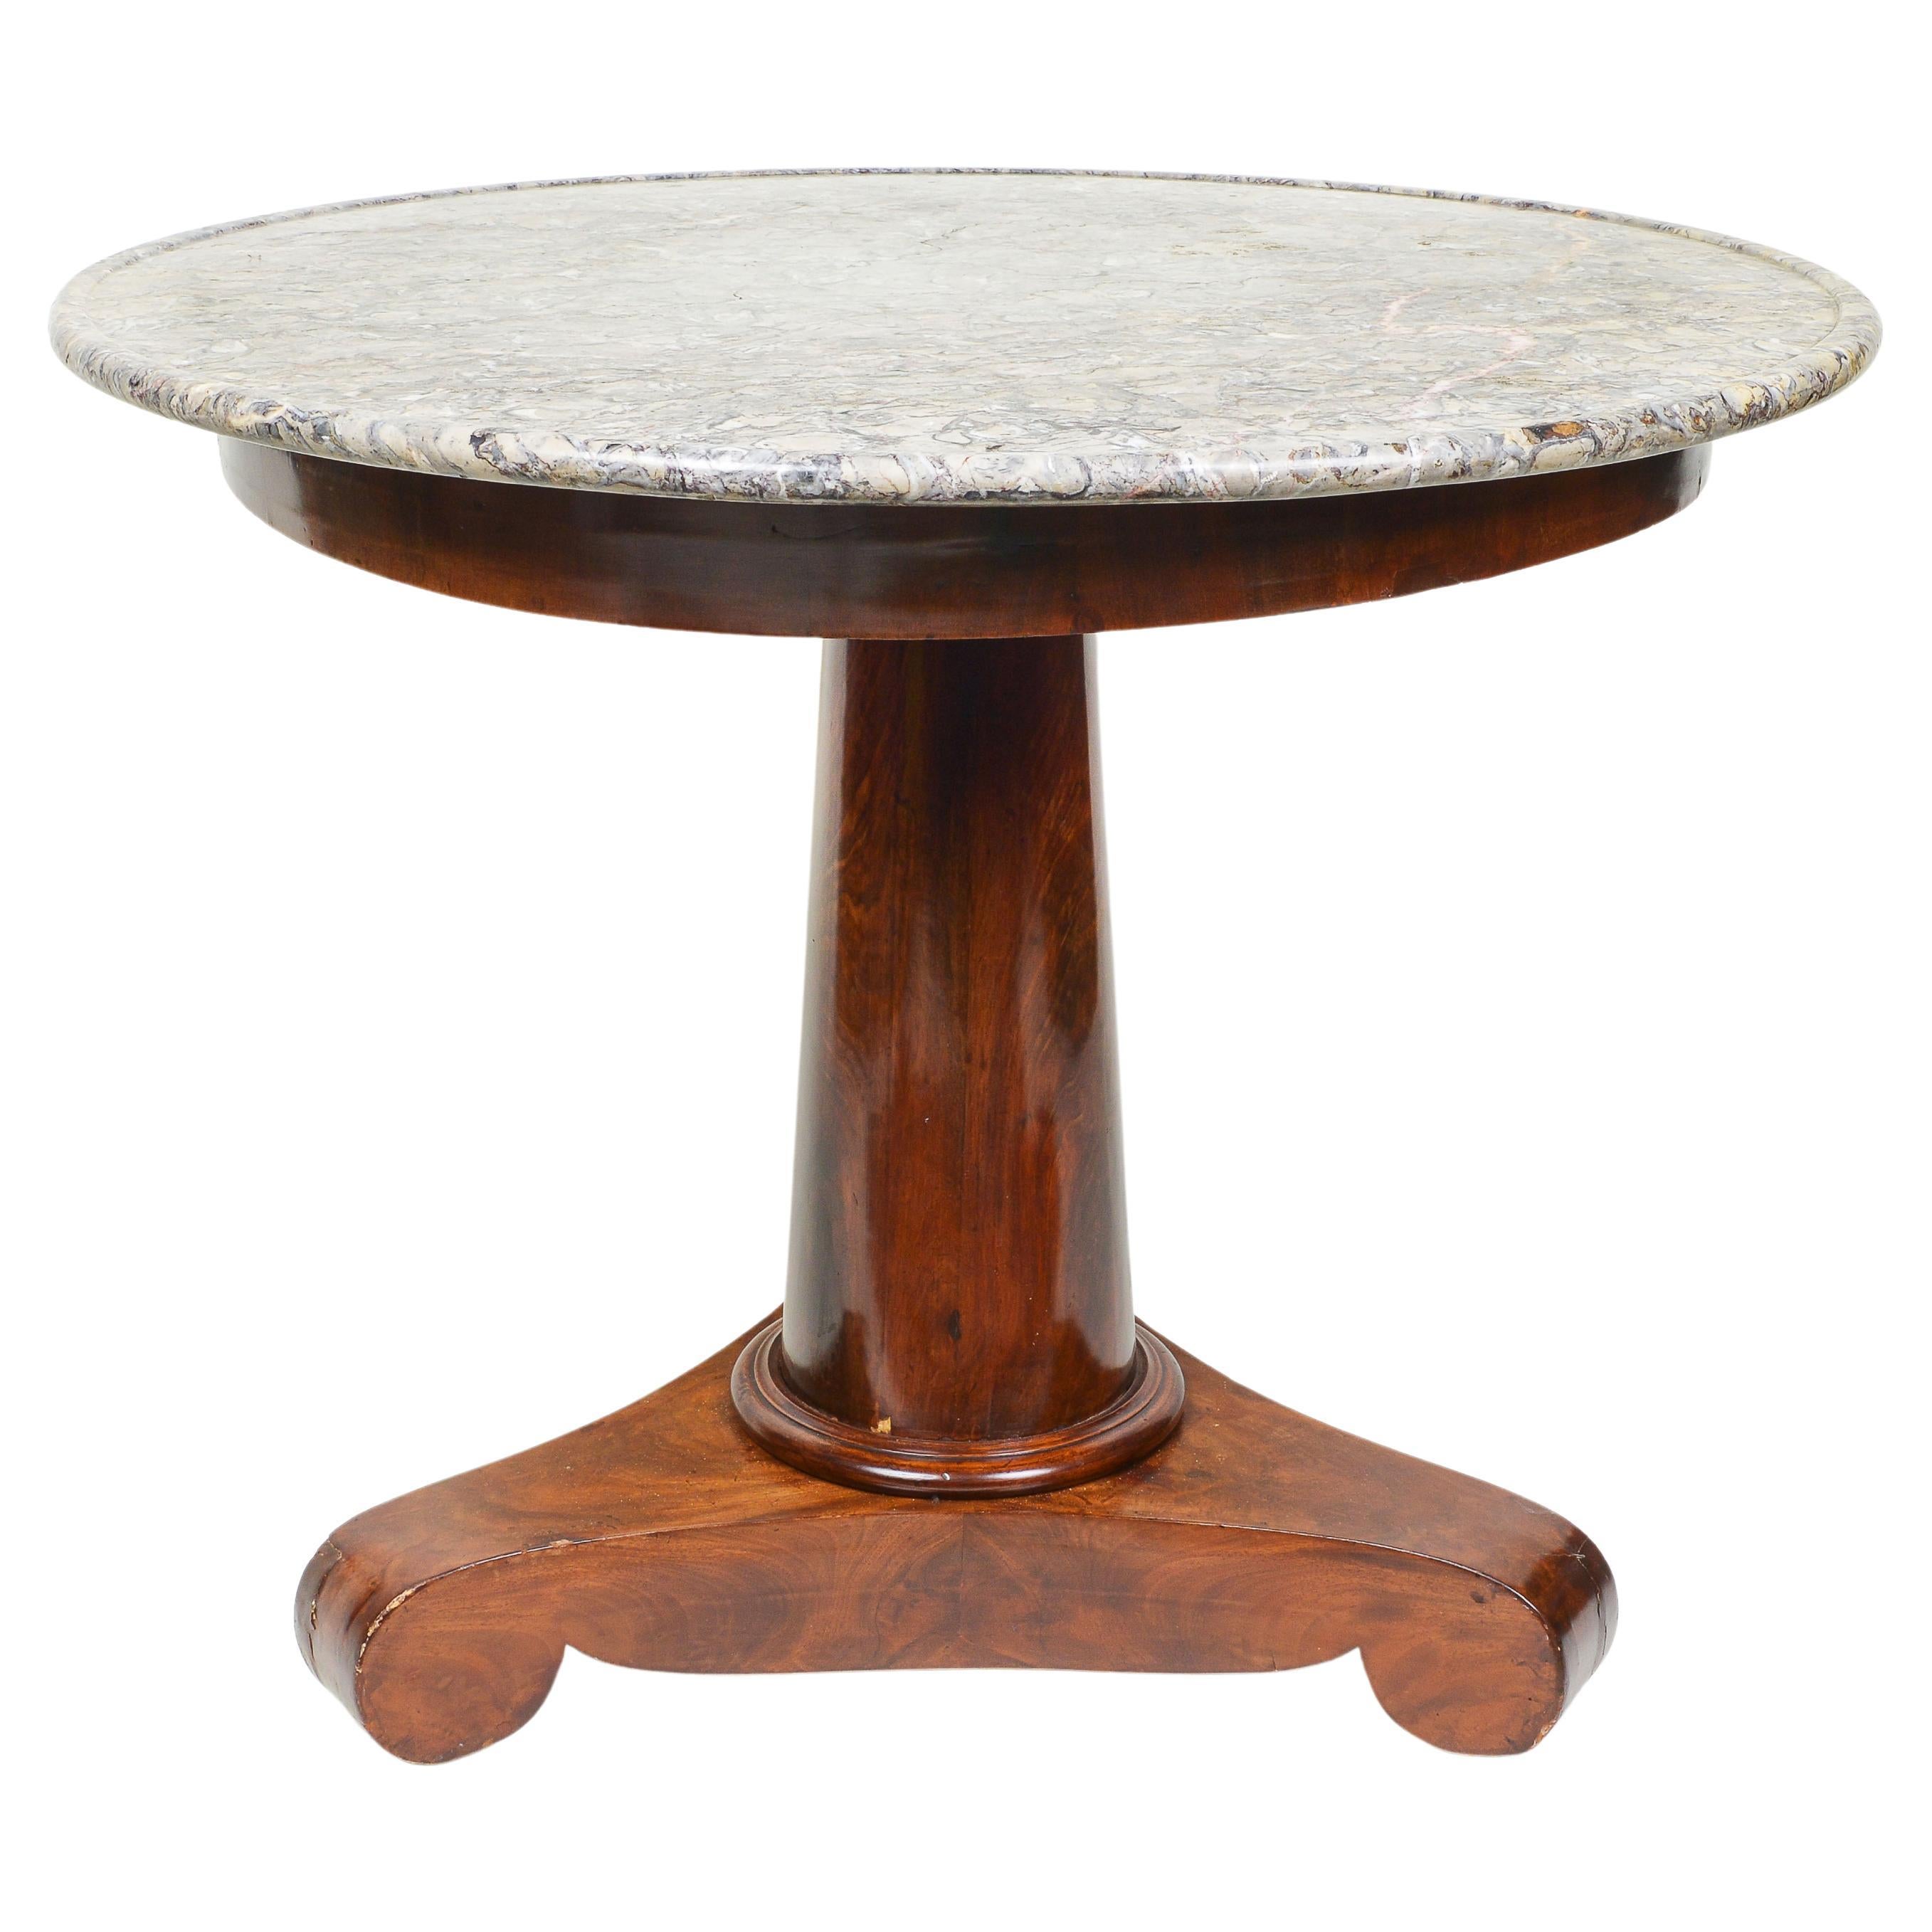 The light gray fossilized marble top supported on center column on a tripod base.